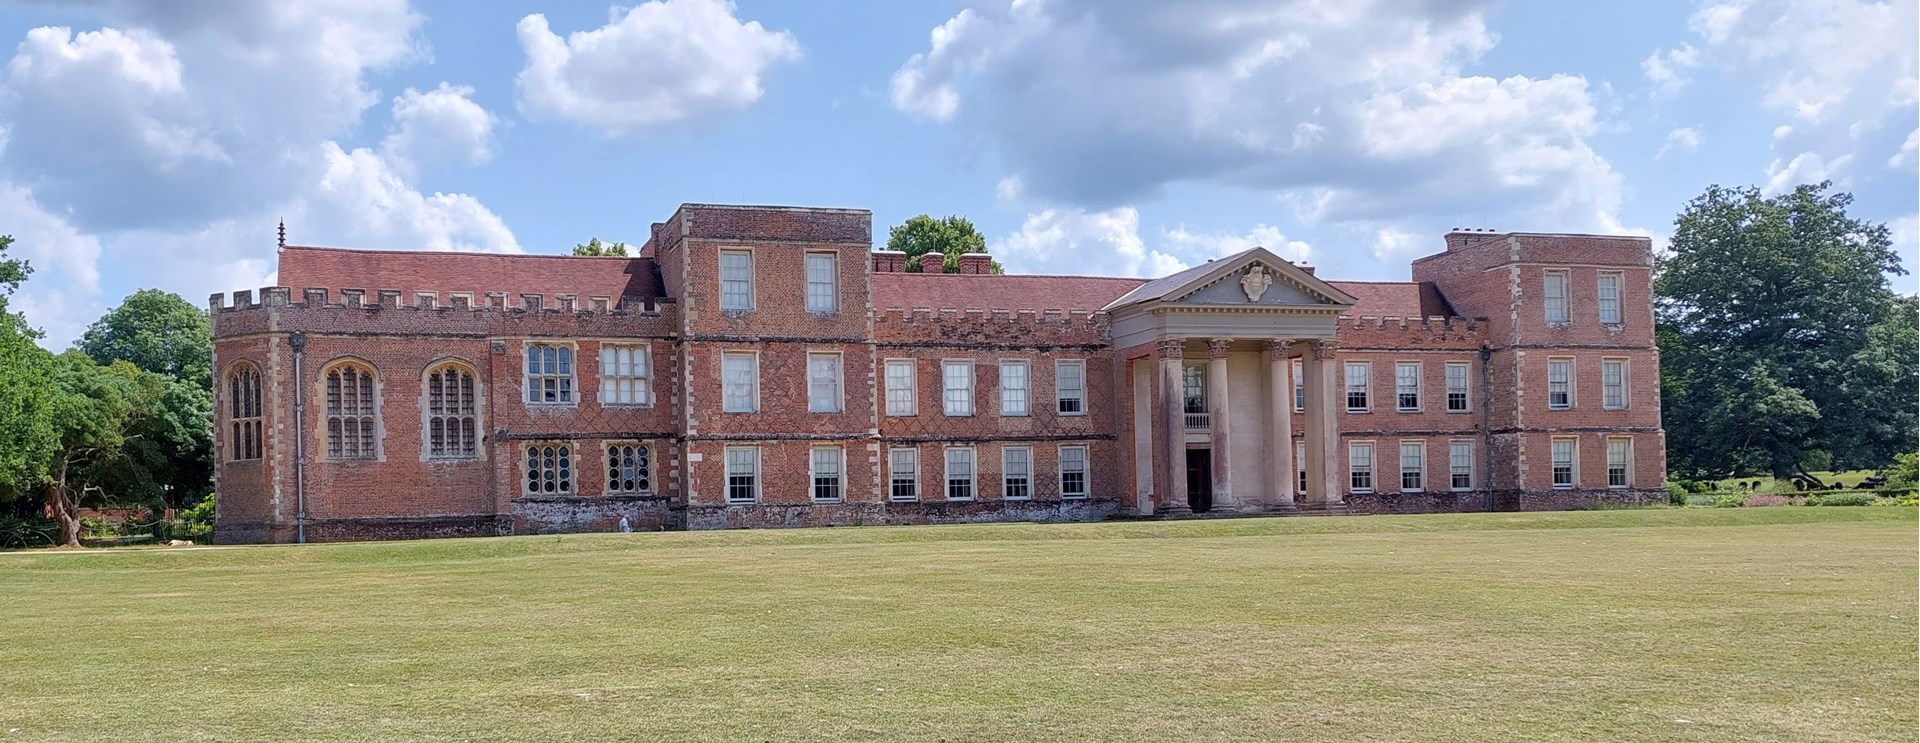 In June 2023 we visited the 500 year old National Trust Property The Vyne near Basingstoke.